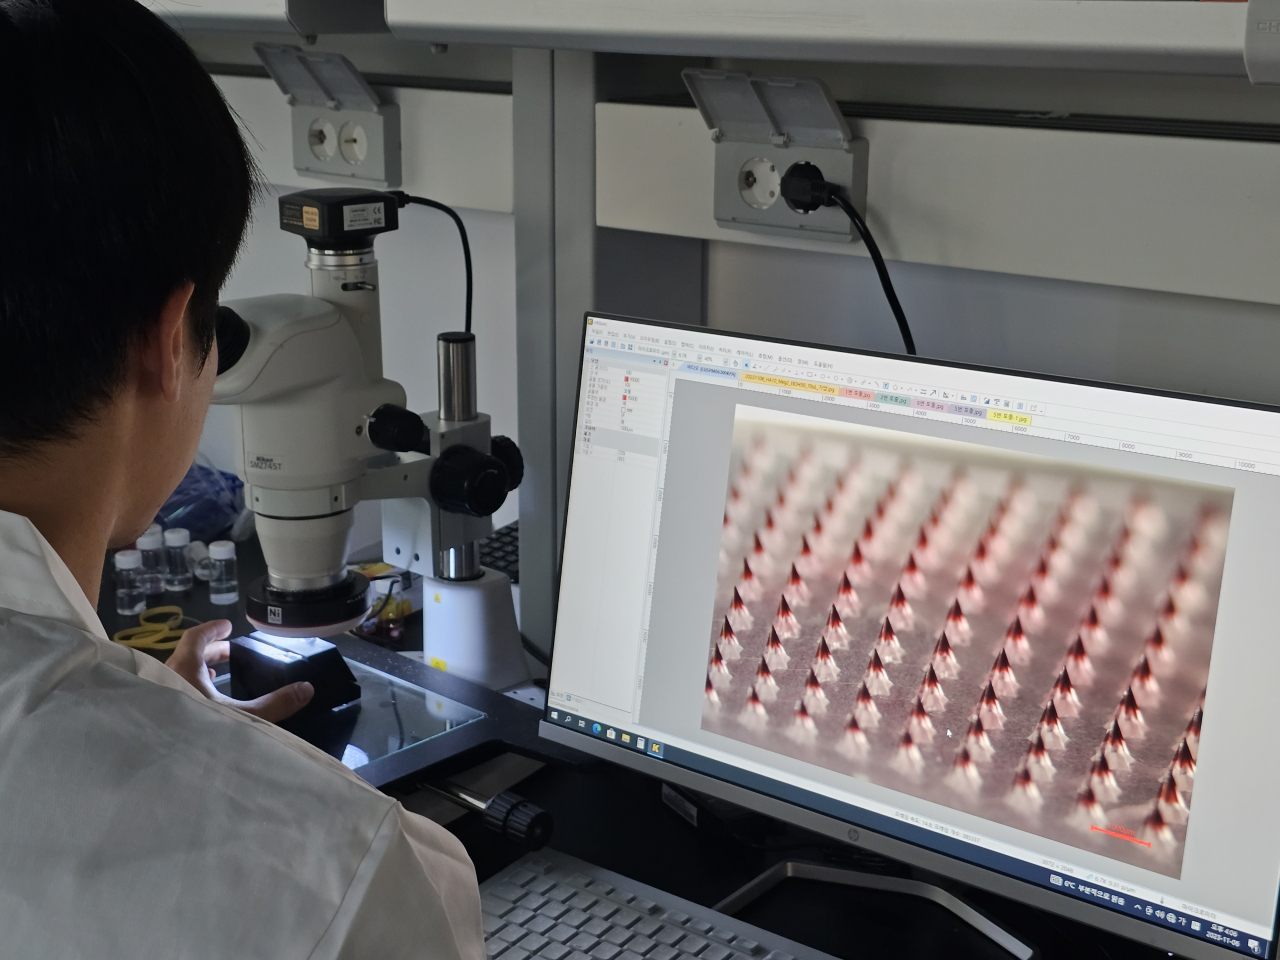 A Daewoong Pharmaceutical researcher shows the company's microneedle platform through a microscope. (Daewoong Pharmaceutical)